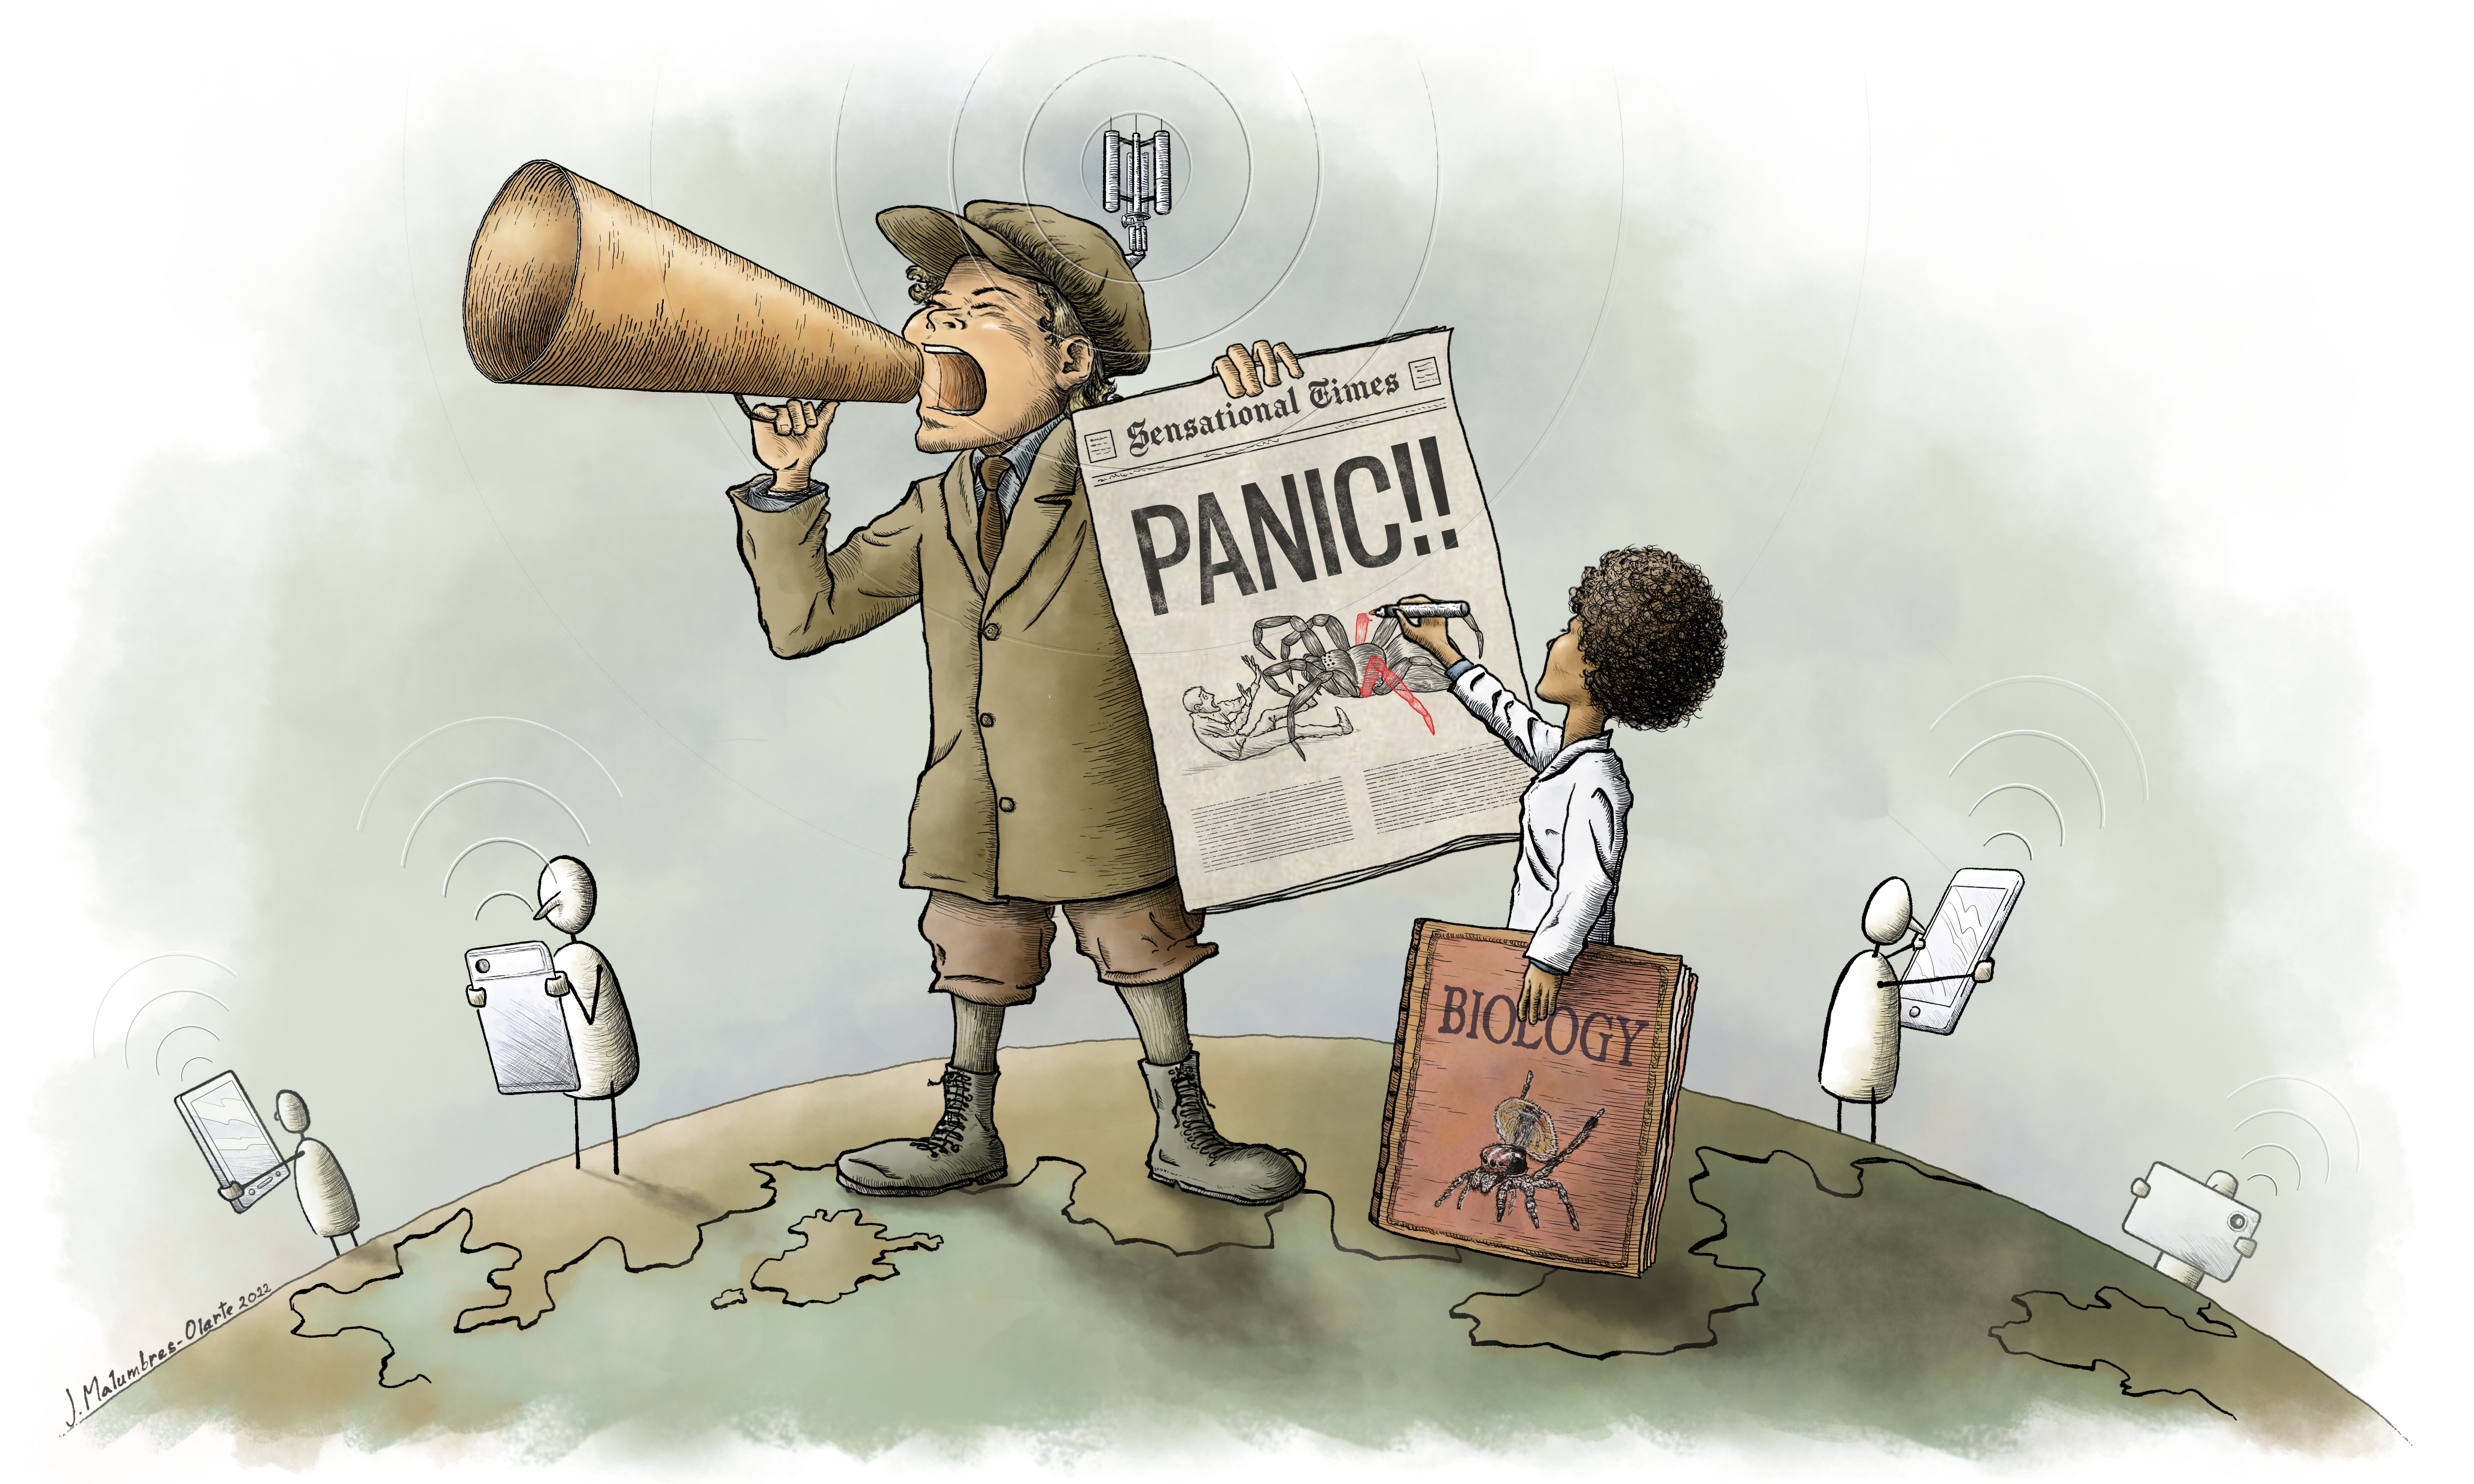 Illustration of a person holding a medaphone and a newspaper with the headline "panic!!" He is standing on top of a map of the world, and a woman with an afro, wearing a white lab coat, and holding a spider biology textbook is correcting a misleading image on the newspaper with a red pen. White figures around the works are reading the news.